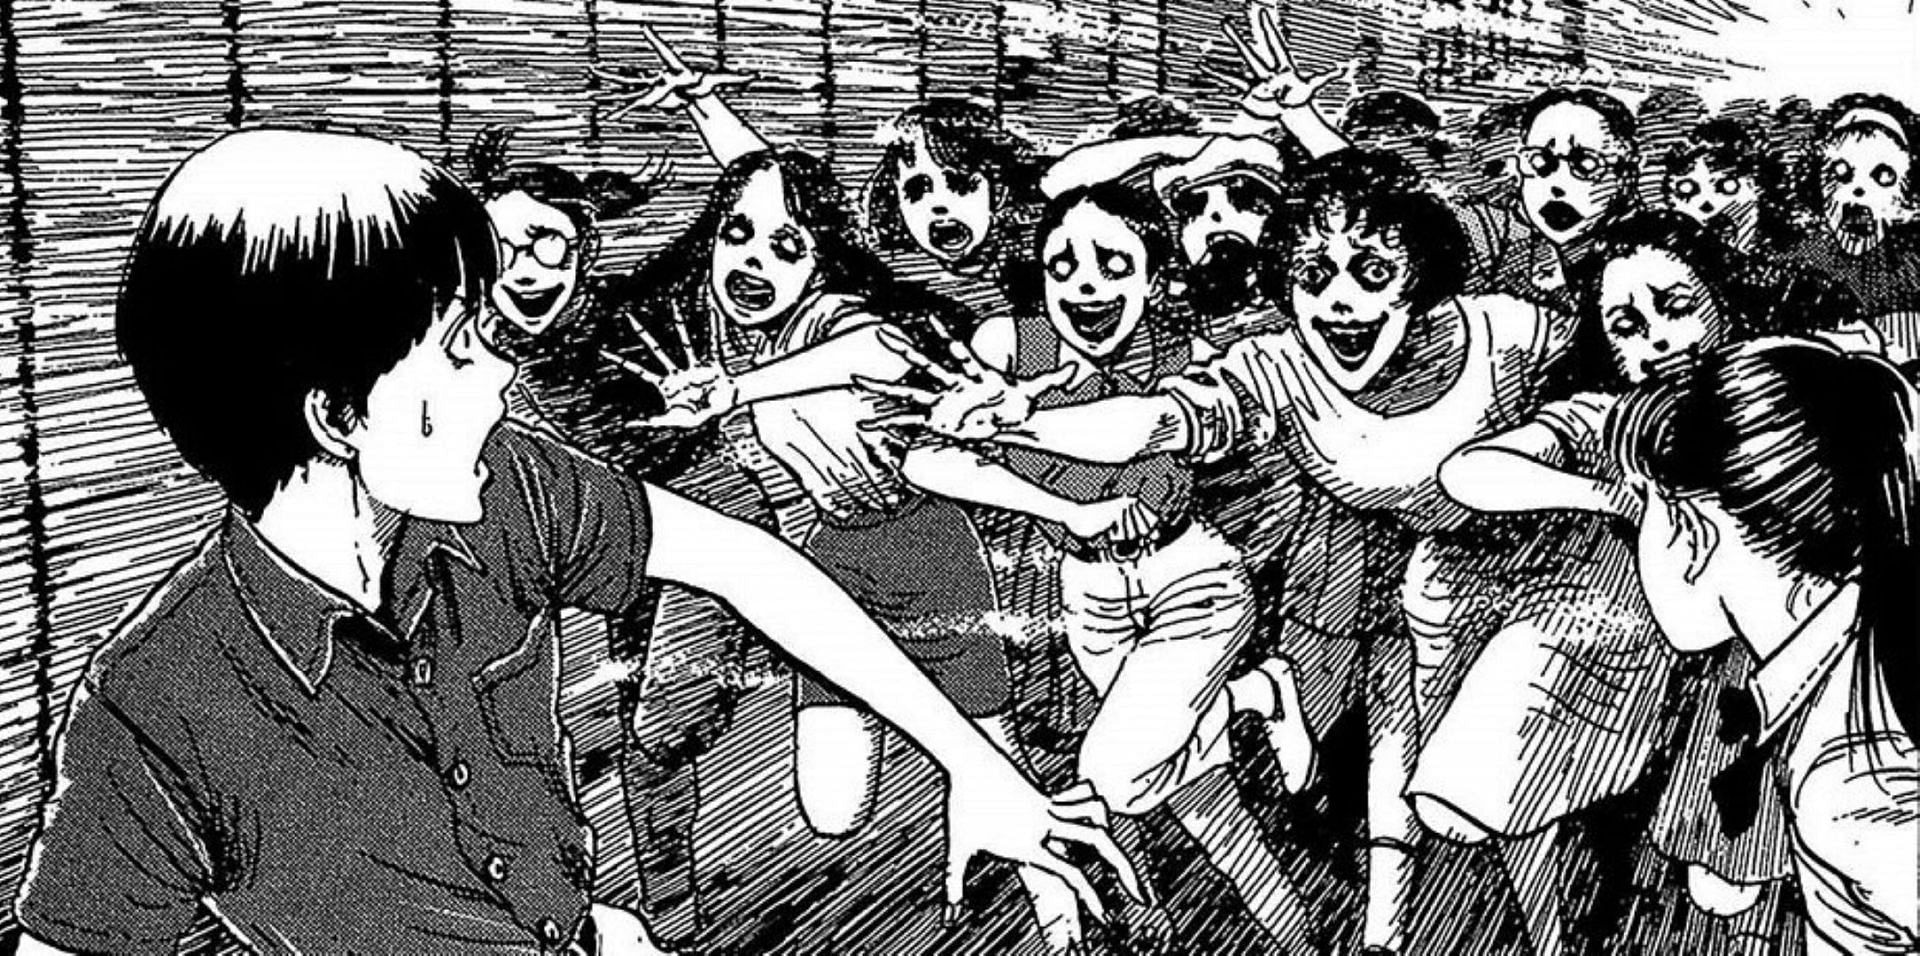 Junji Ito: Every manga by the most iconic horror mangaka of our time